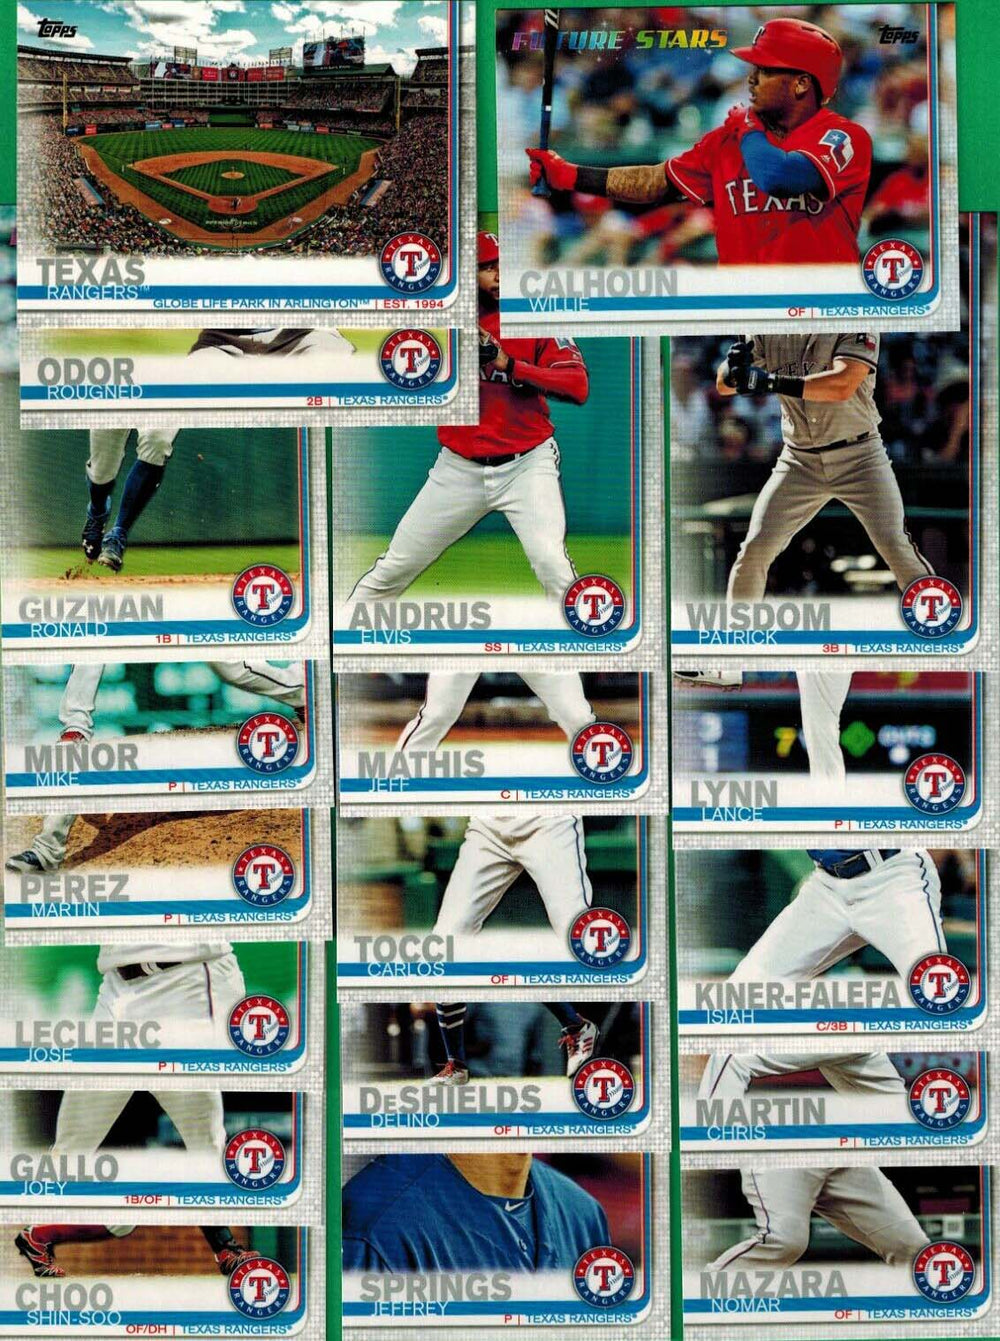 Texas Rangers 2019 Topps Complete Series One and Two Regular Issue 19 Card Team Set with Joey Gallo, Rougned Odor, Willie Calhoun Future Stars plus